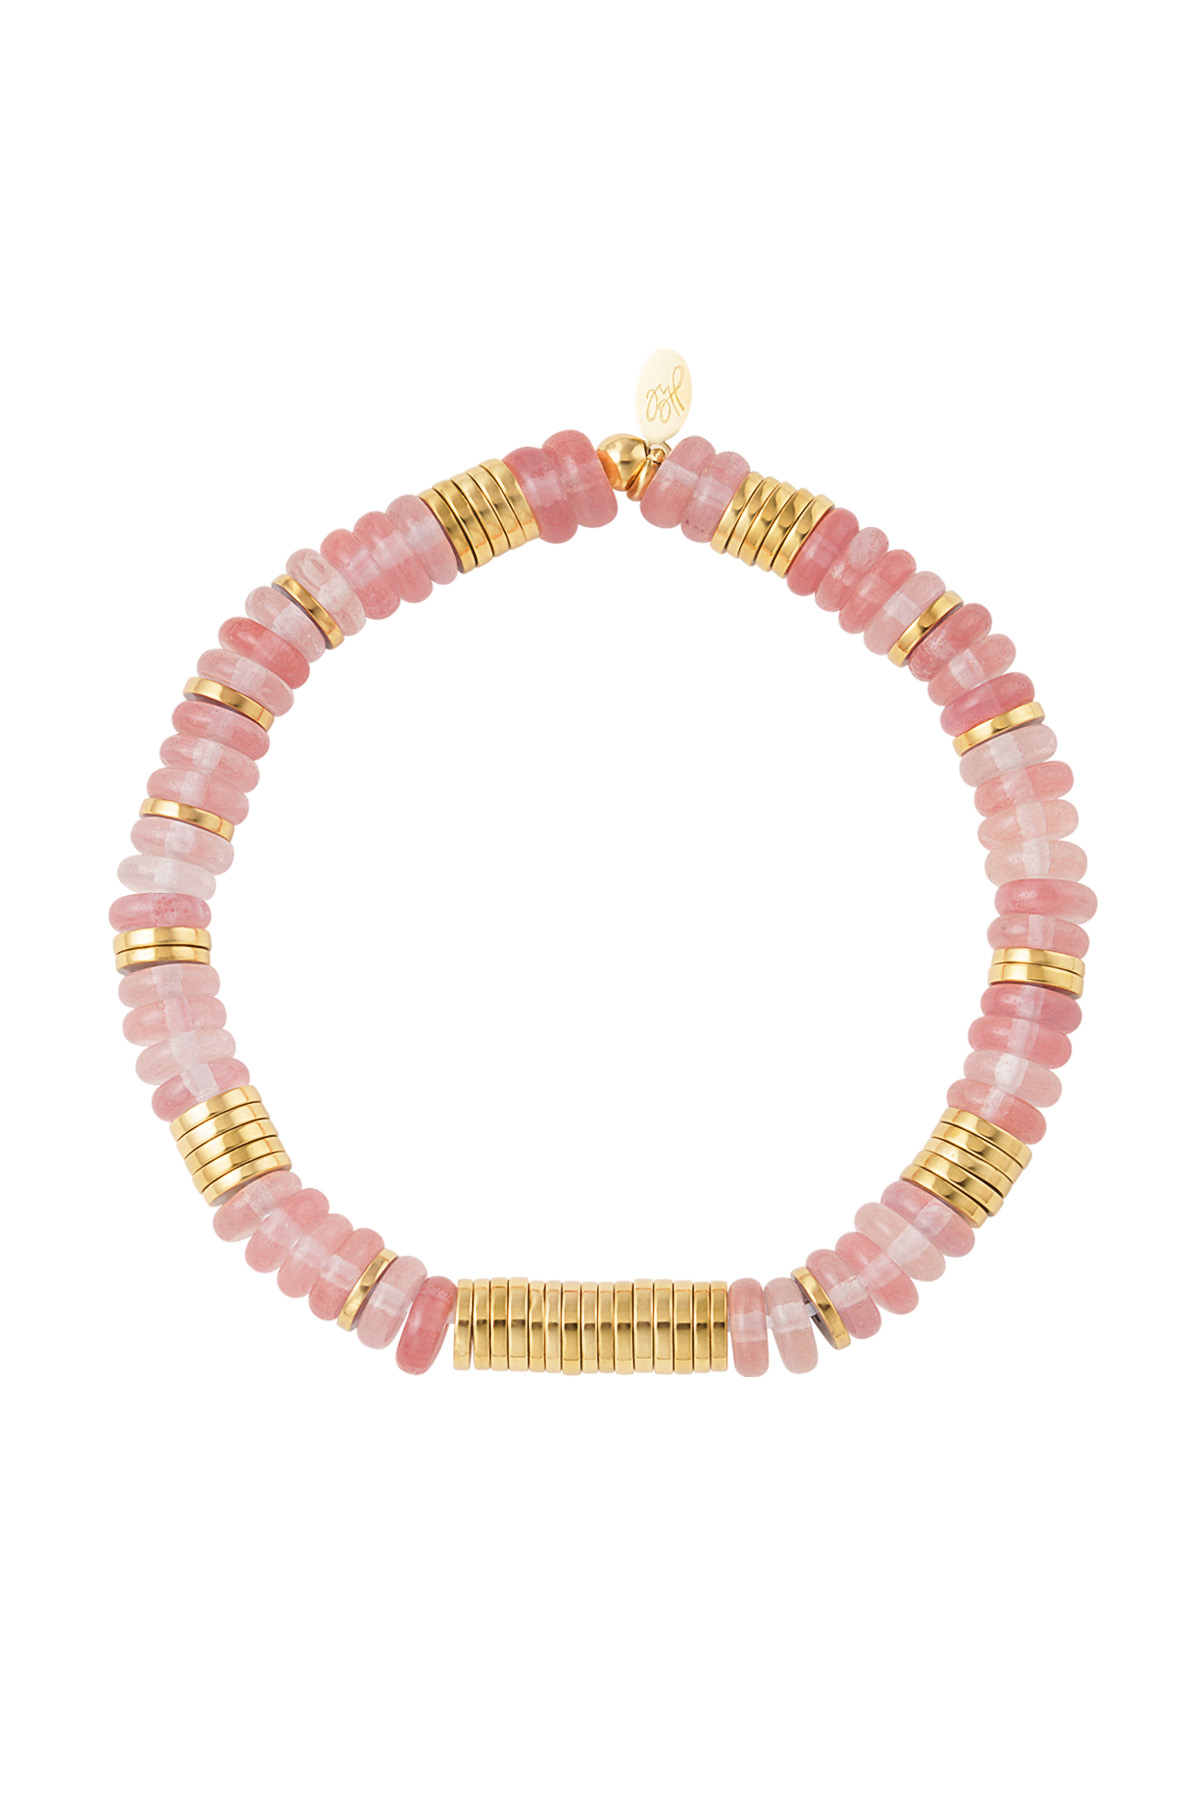 Link bracelet beads - gold/pink Pink &amp; Gold Stainless Steel